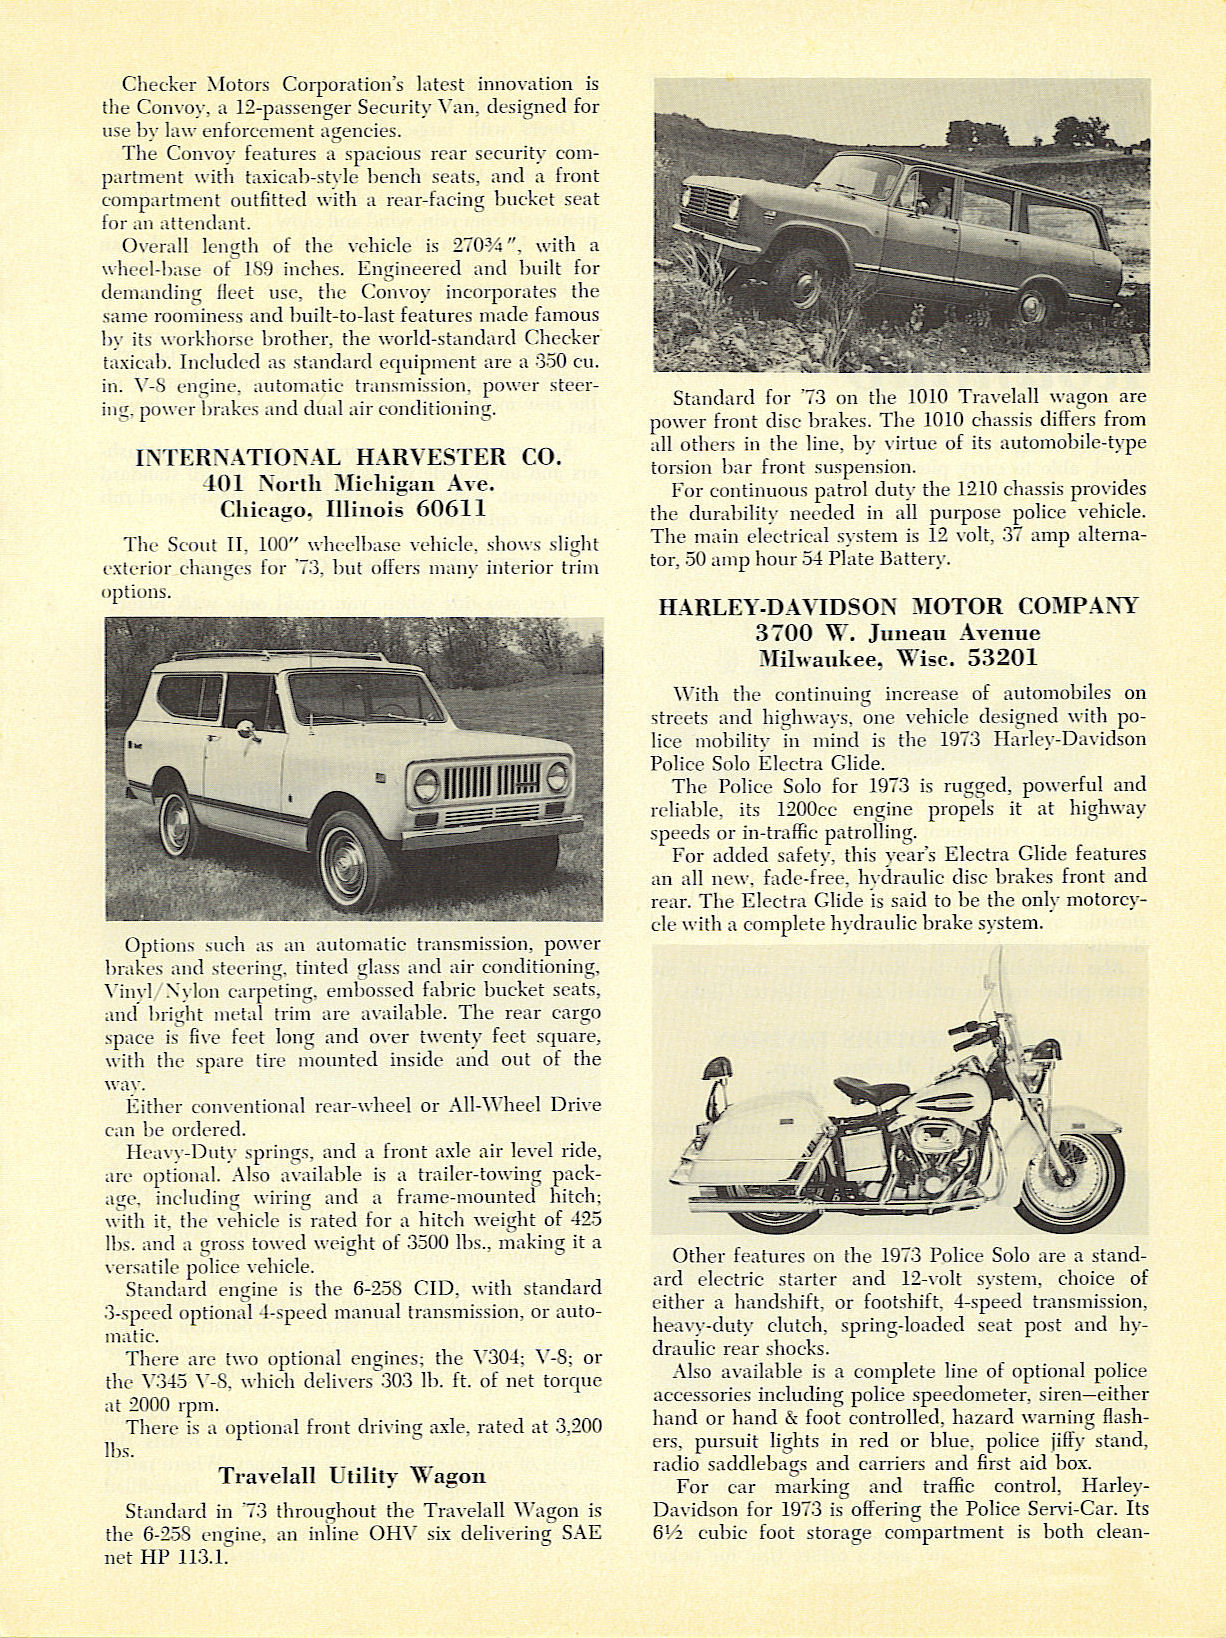 1973 Police Vehicles Booklet Page 4